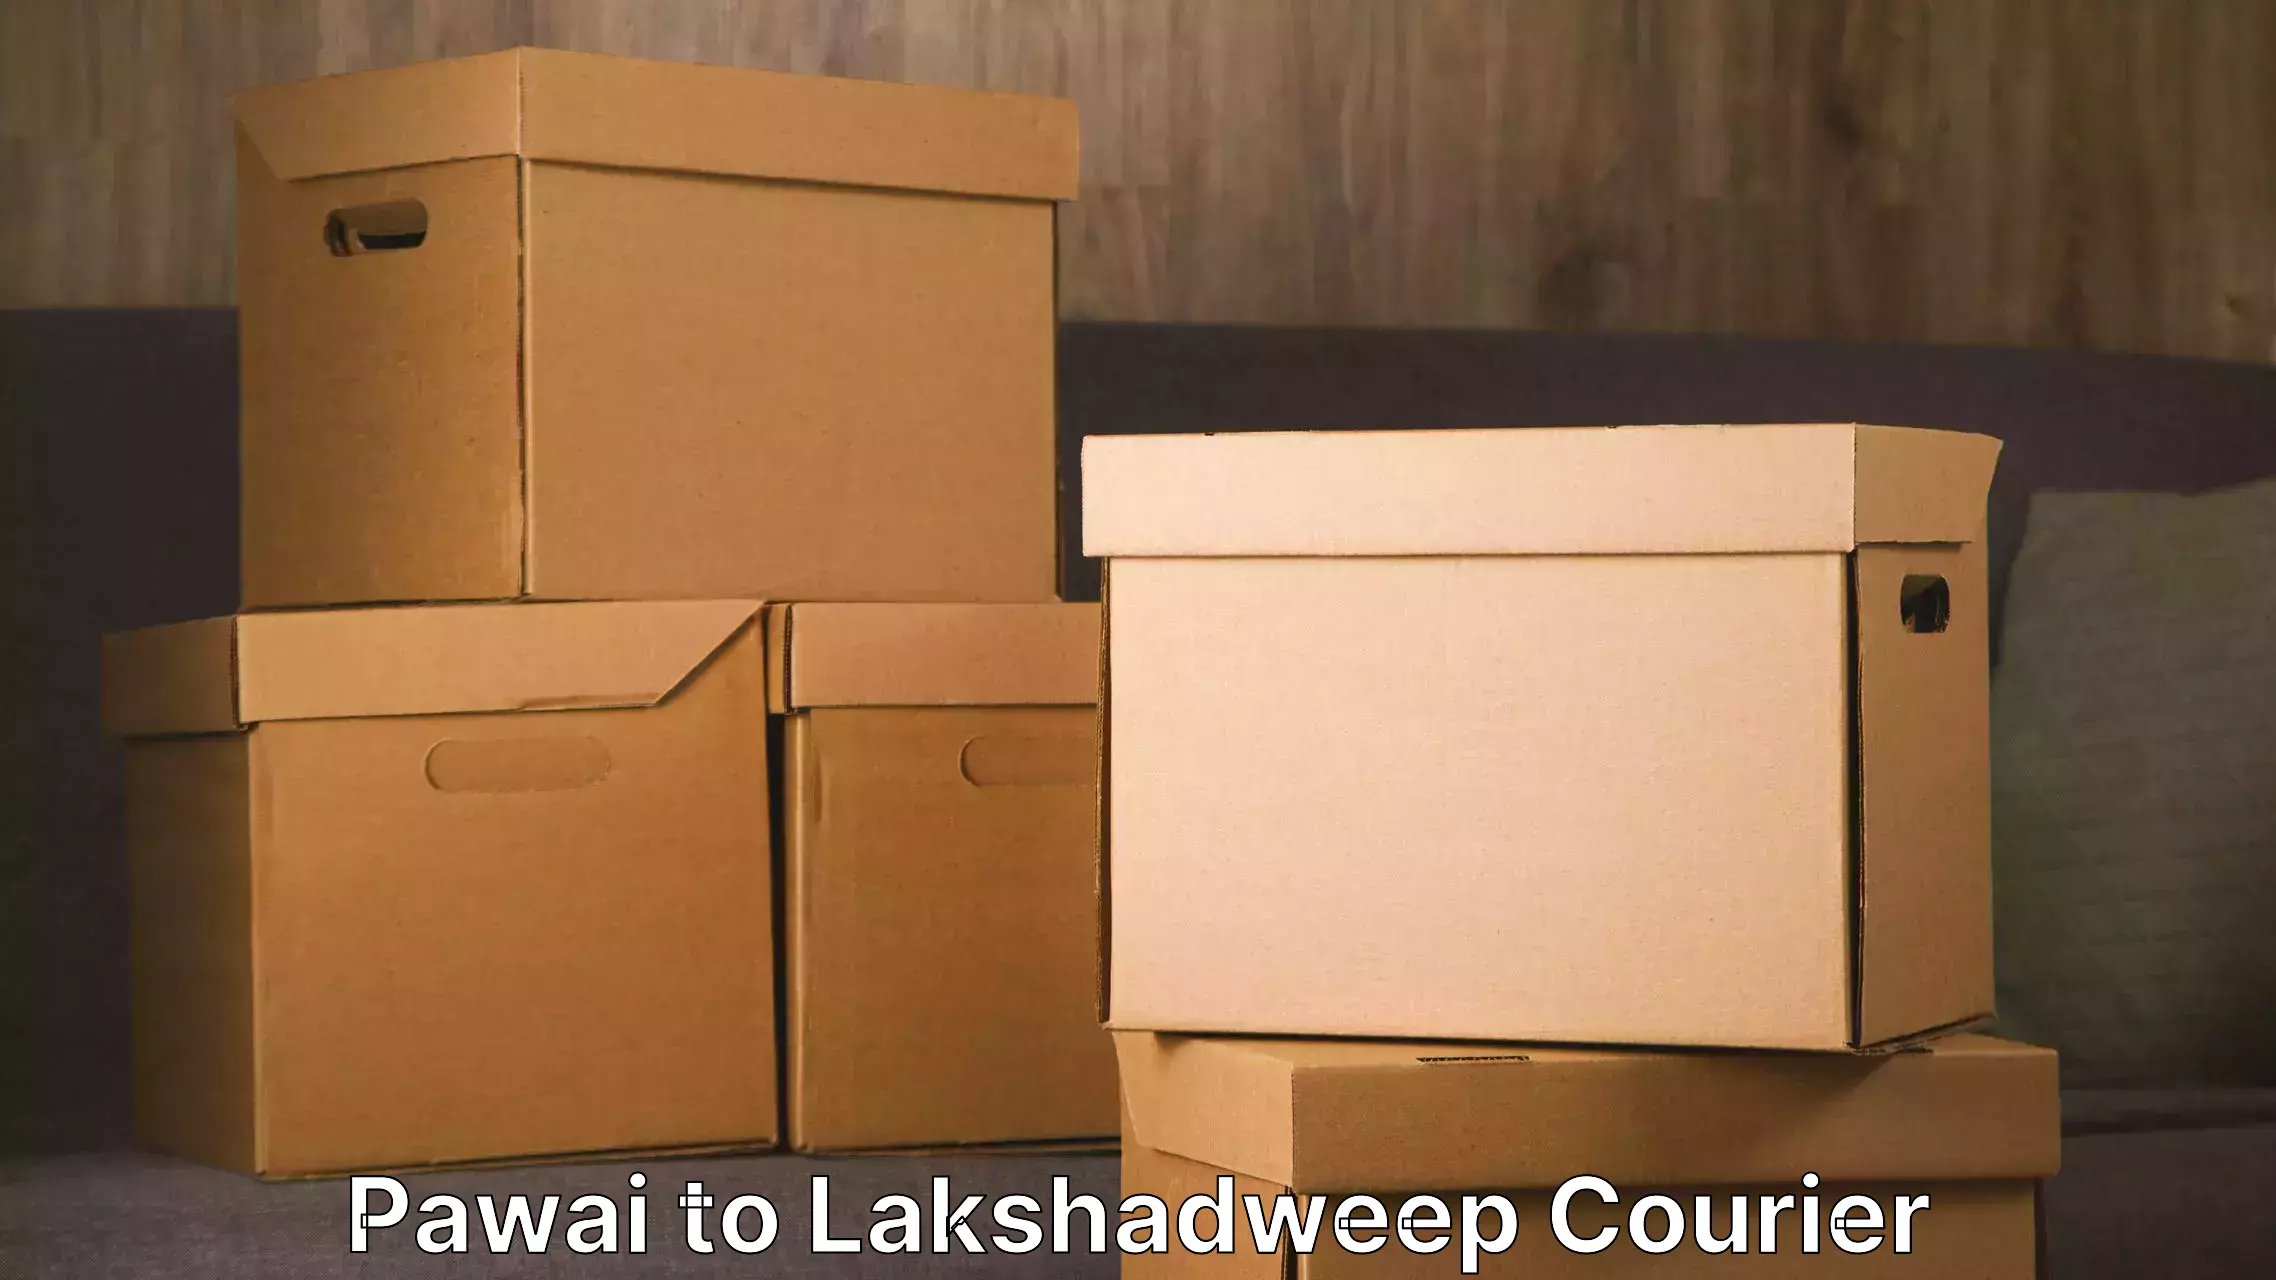 Trusted relocation experts Pawai to Lakshadweep